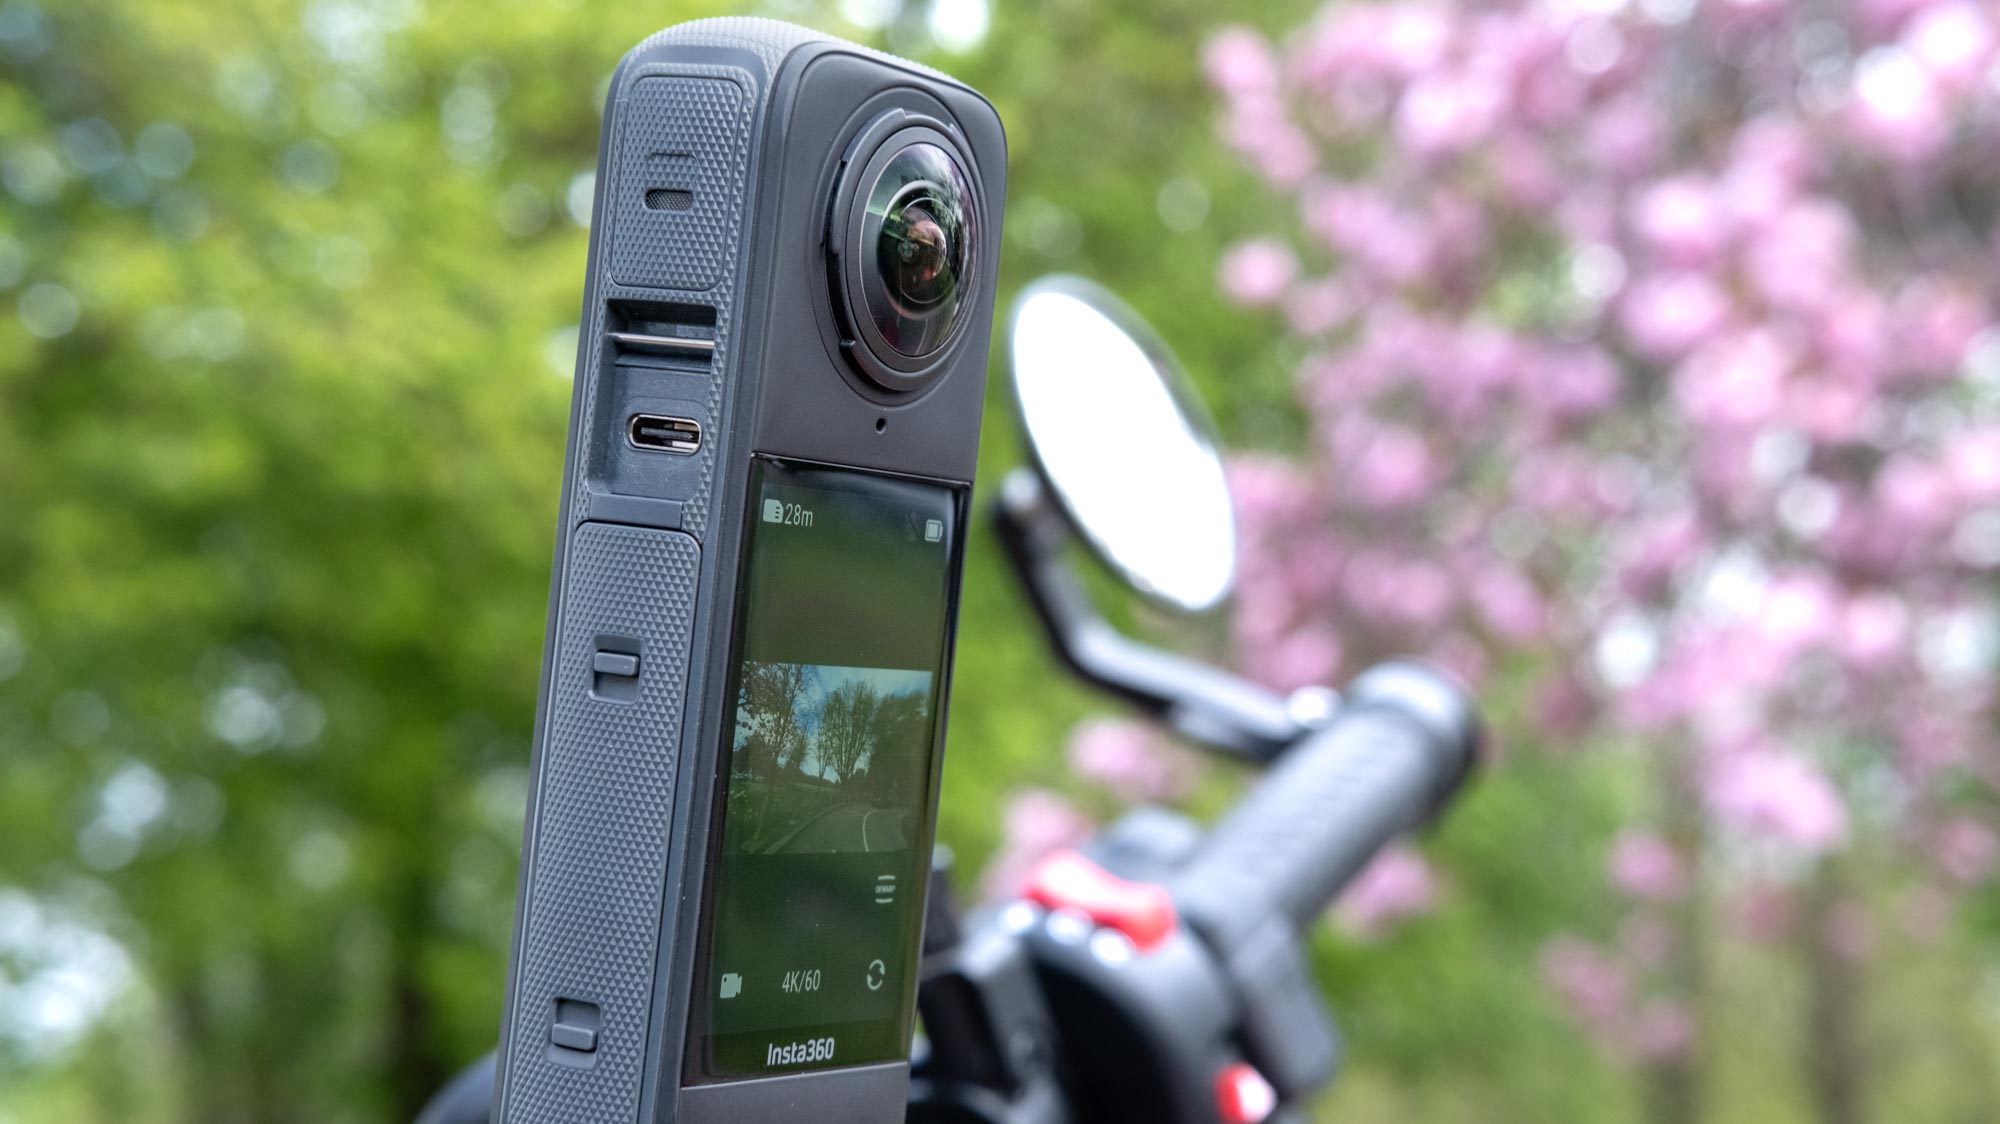 A photo of the Insta360 X4 mounted on motorcycle handlebars with green and pink foliage in the background. On the screen of the camera is the same background scene. The USB-C cover has been taken off to show the connection port.